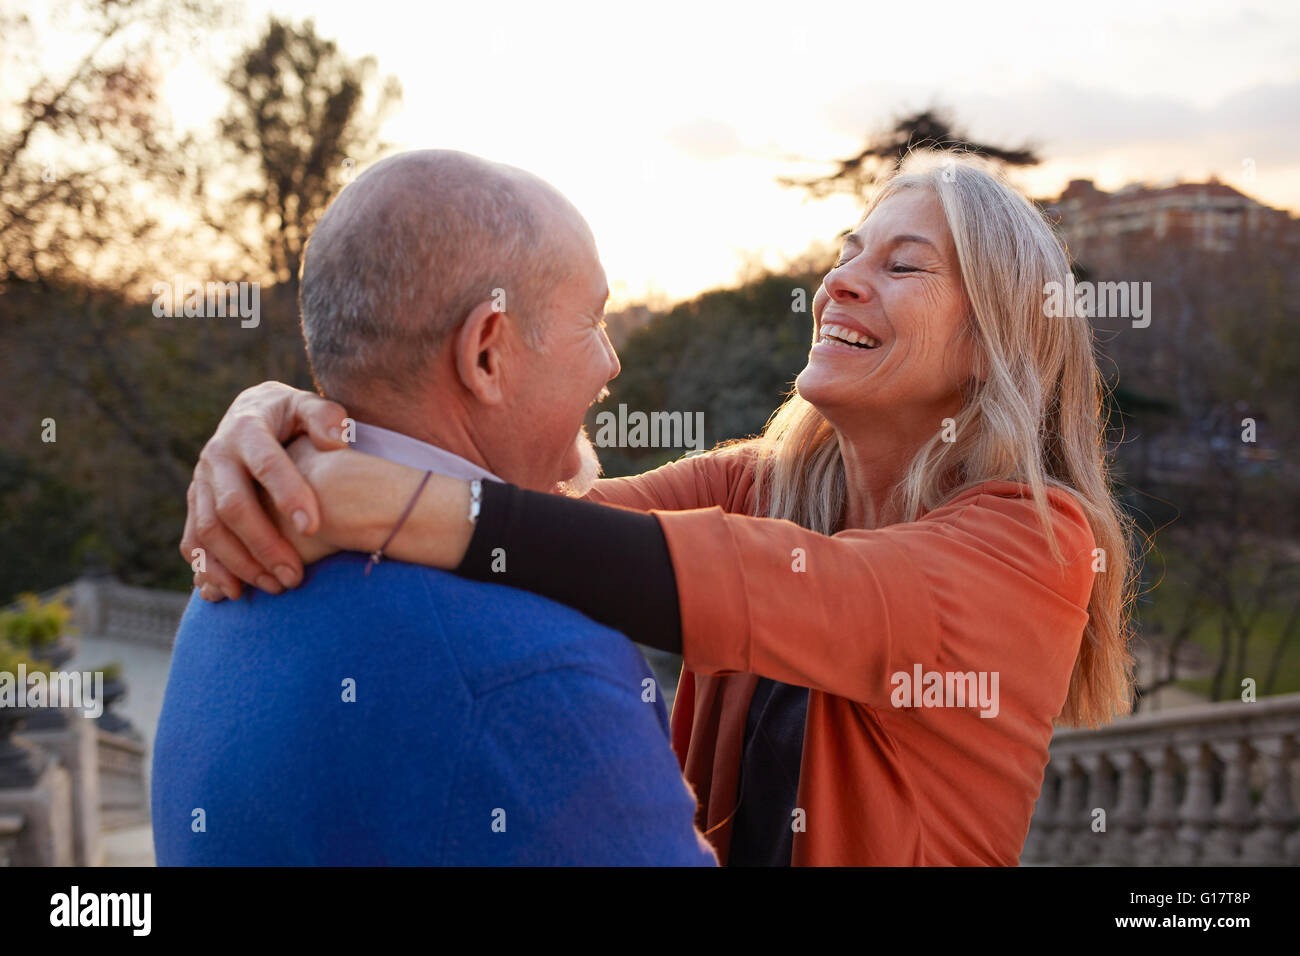 Woman with arms around man face to face smiling Stock Photo